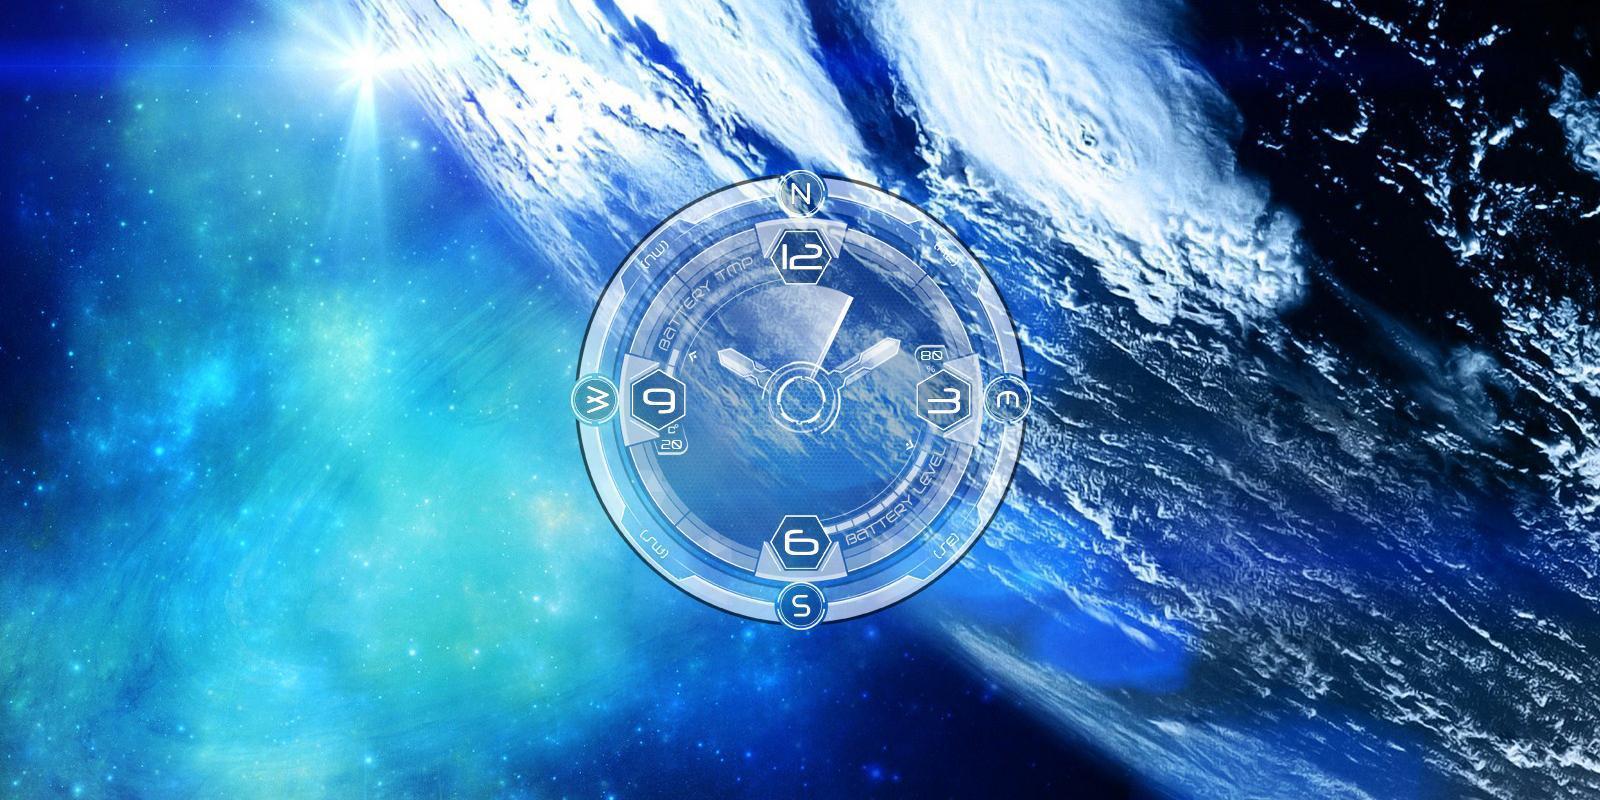 Galaxy Compass Live Wallpaper Apps on Google Play